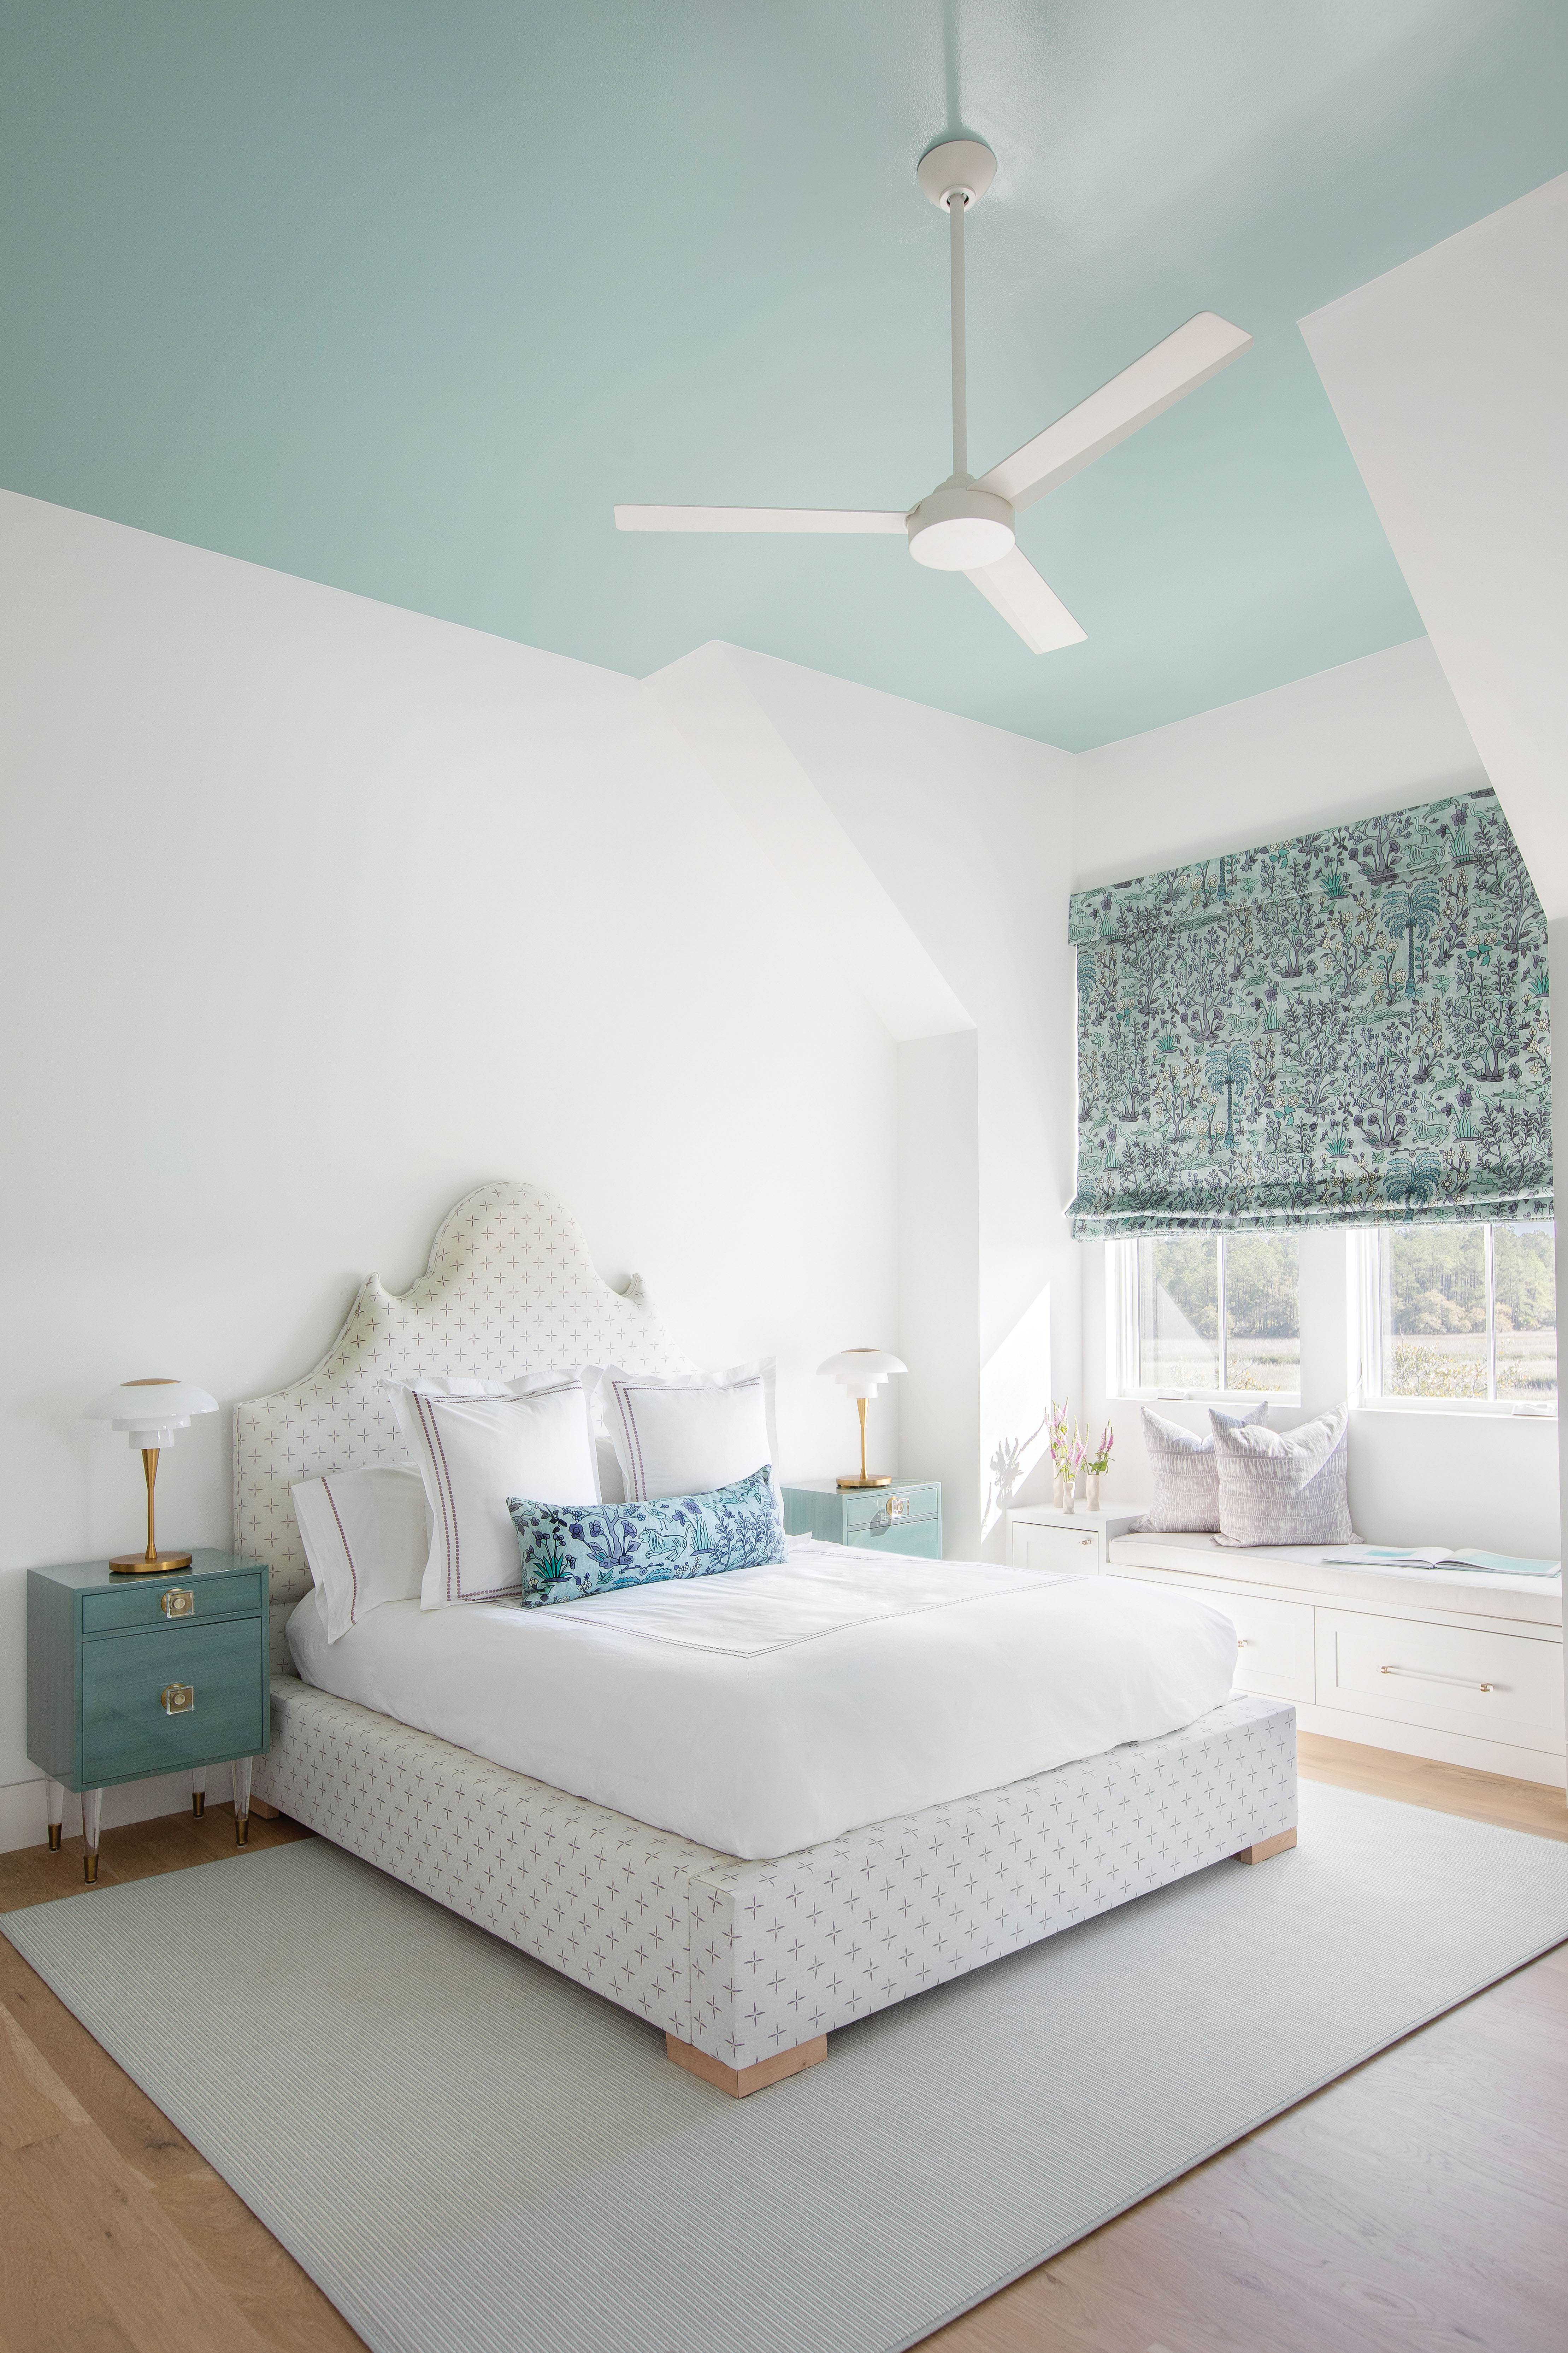 Color Her Happy: The daughter’s room (she still lives at home) features The Vale London “Mighty Jungle” cotton in “Lagune” on the window coverings. Its soft aqua carries through to the painted ceiling as well as the bathroom tile. “The fabric is so perfectly her!” says her mom.